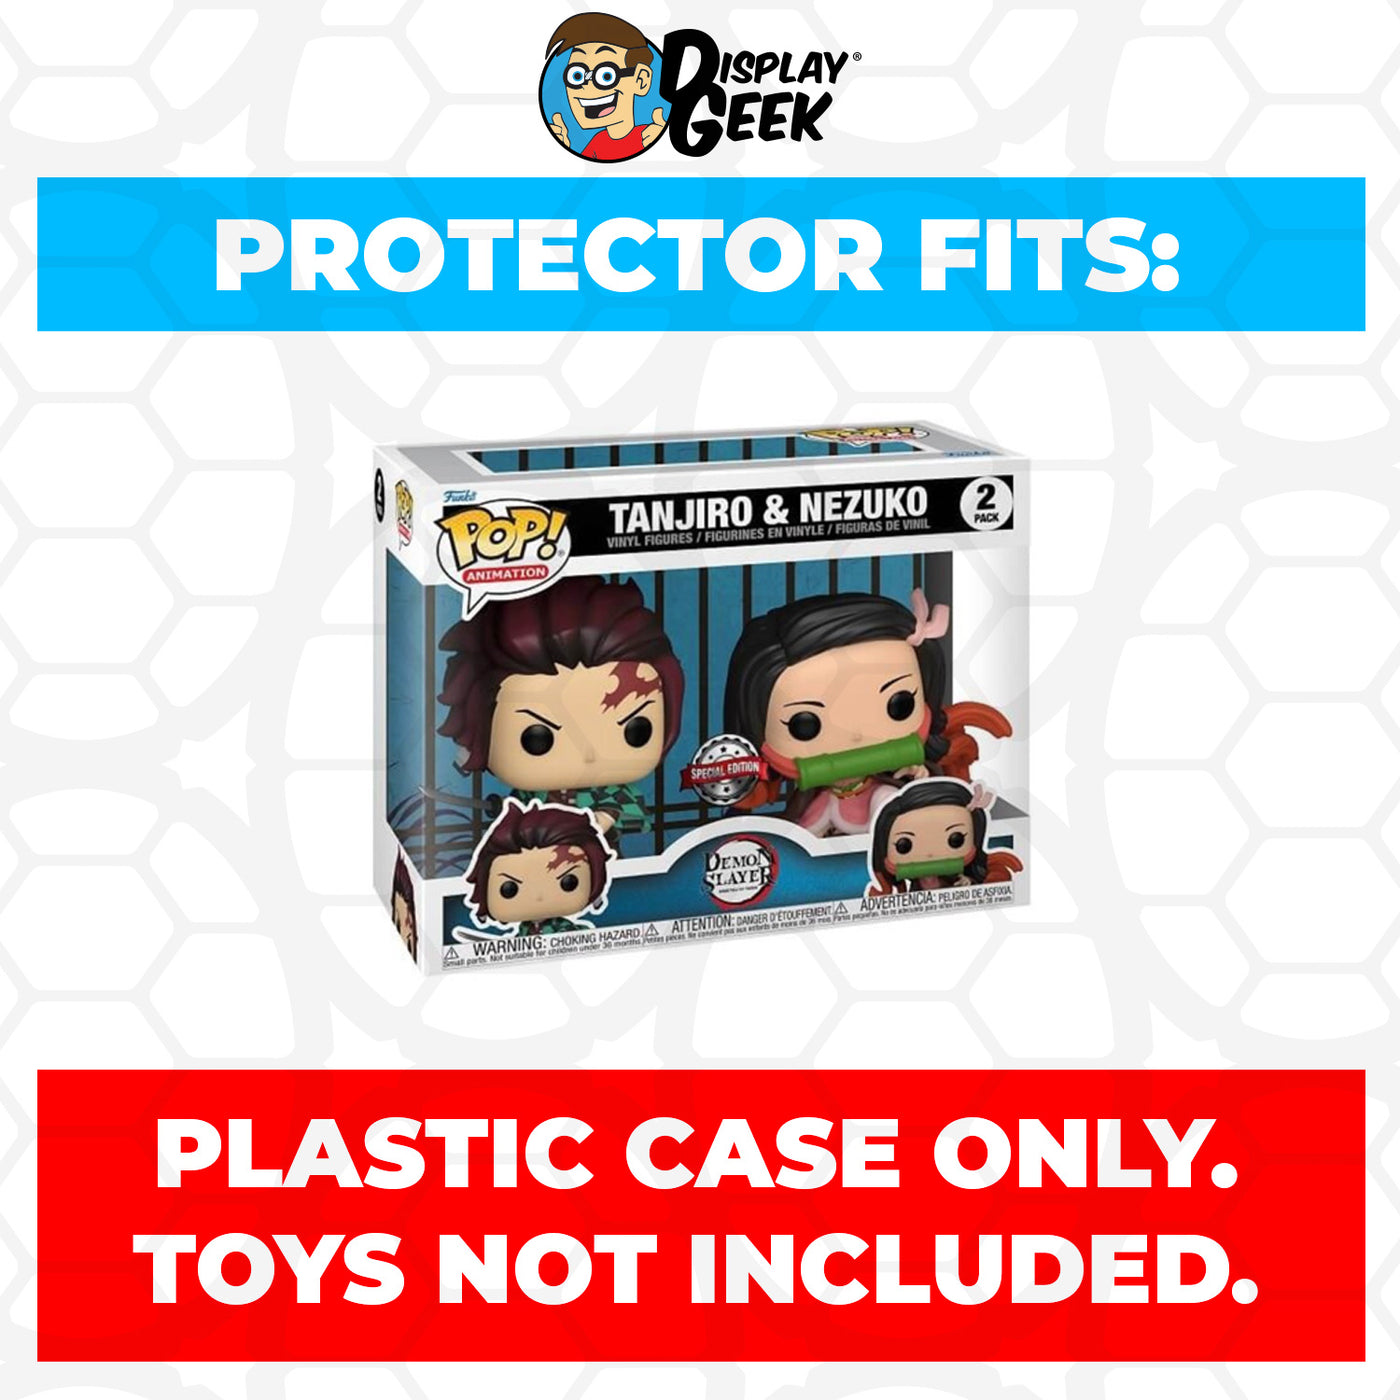 Pop Protector for 2 Pack Demon Slayer Tanjiro & Nezuko Funko Pop on The Protector Guide App by Display Geek